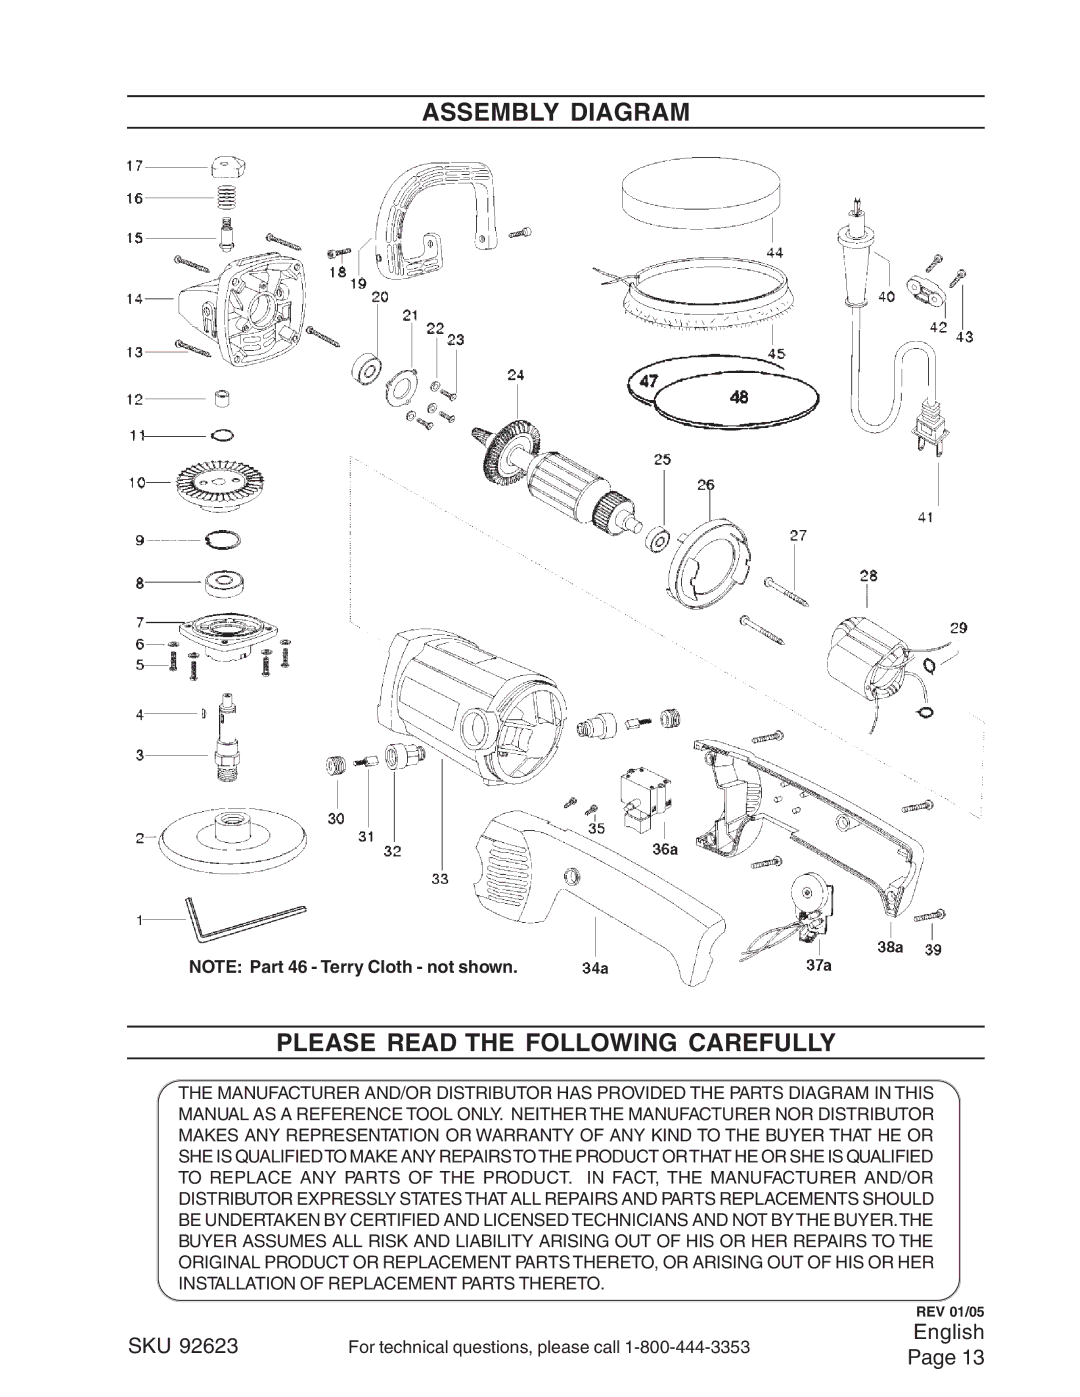 Harbor Freight Tools 92623 operating instructions Assembly Diagram Please Read the Following Carefully 